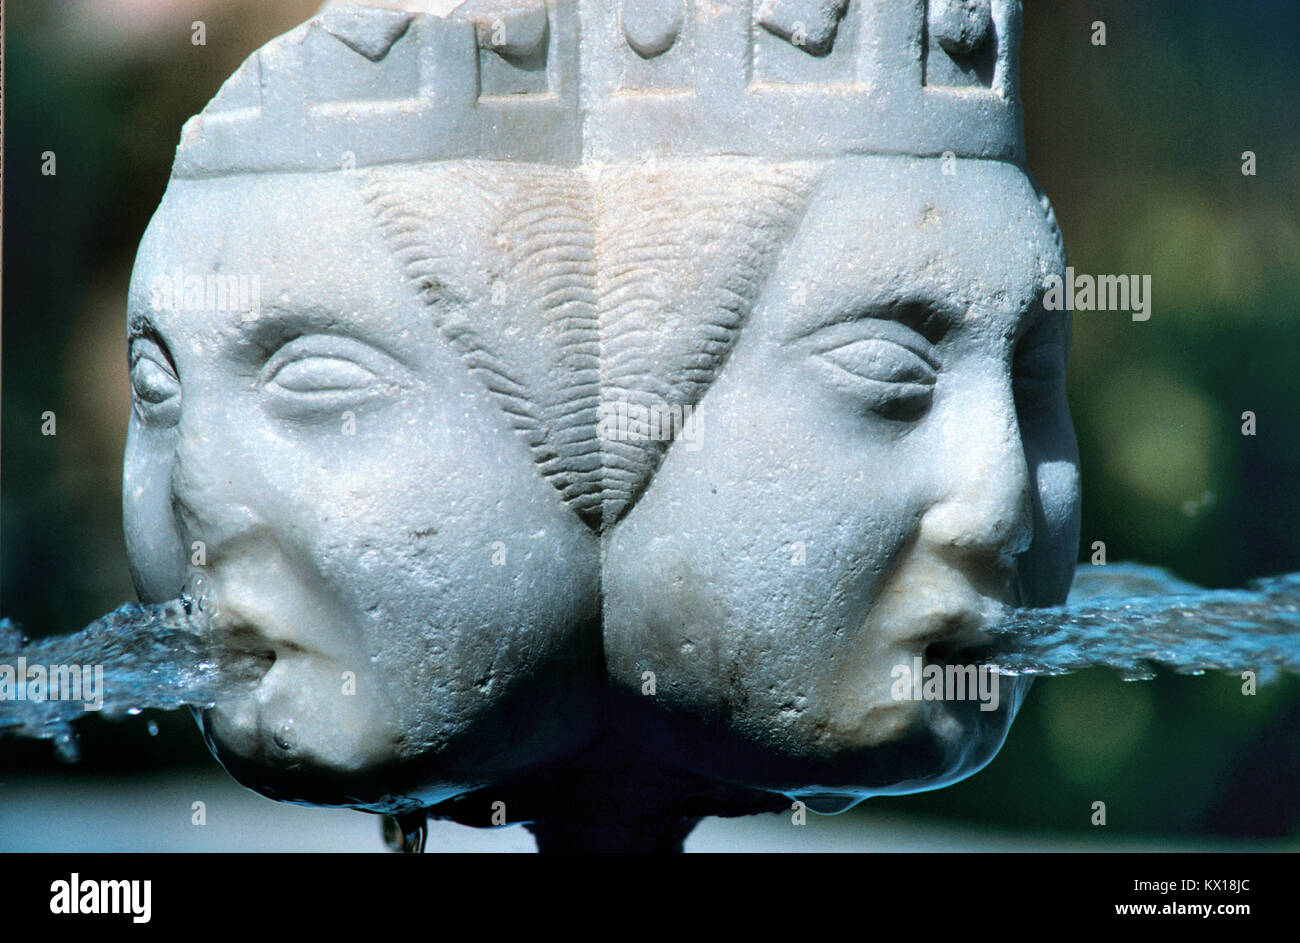 Byzantine Era Marble Fountain Consisting of Three Female Human Heads & Faces Where Water Spouts from the Women's Mouths, Uncovered in the Region of Tokat, Turkey Stock Photo